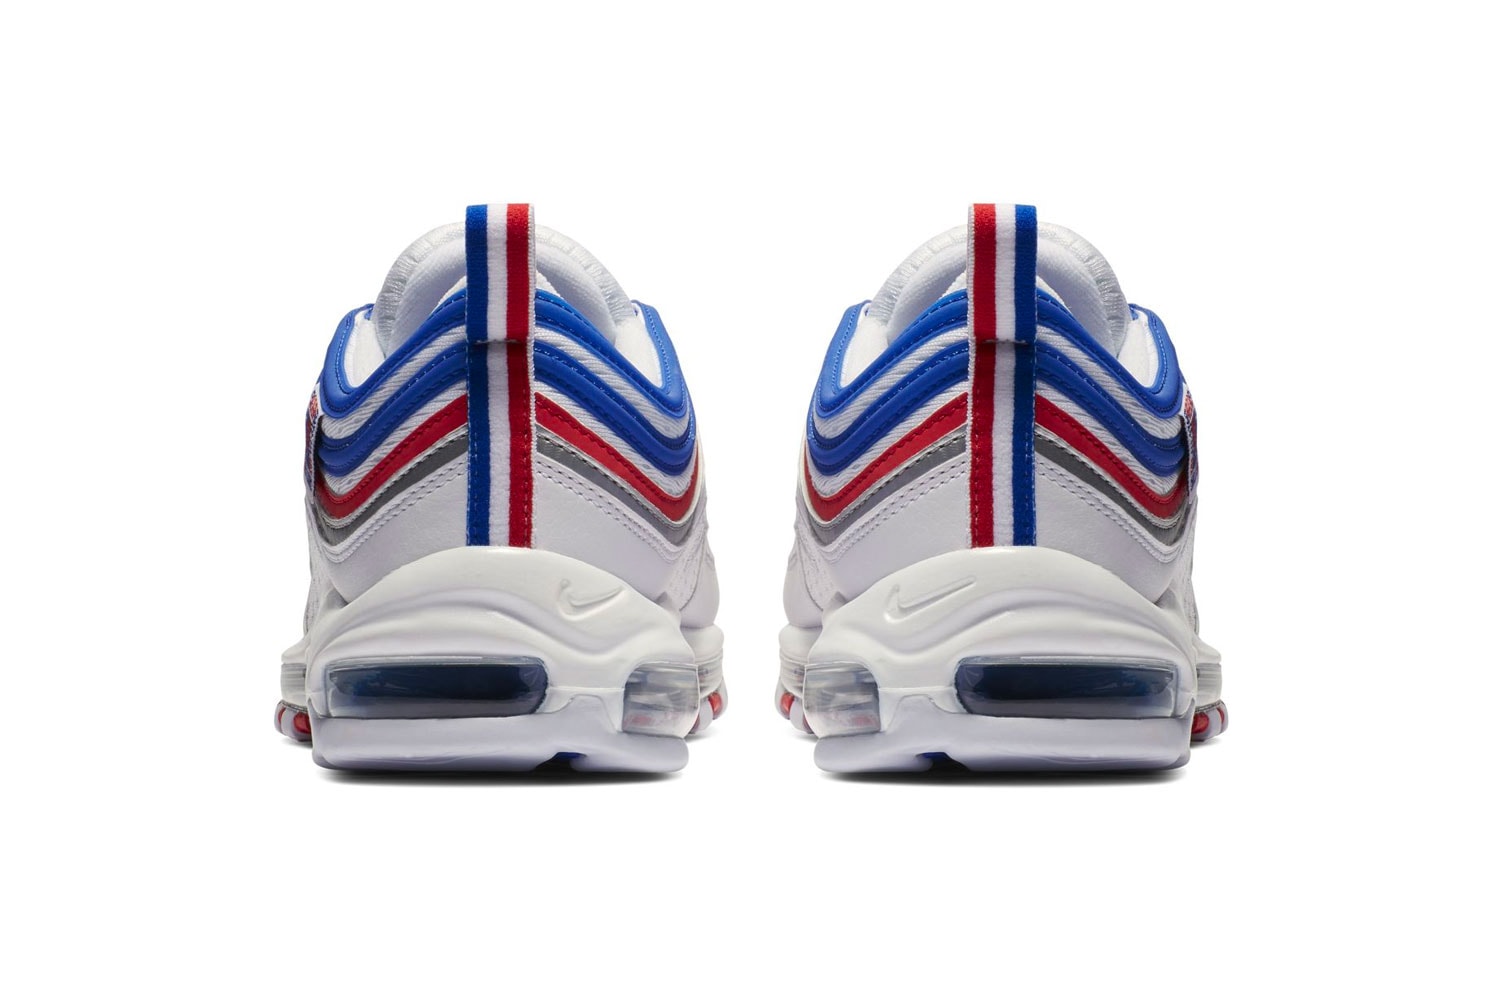 Nike Air Max 97 "Game Royal/Metallic Silver" Release Info date price sneaker colorway blue red silver white 